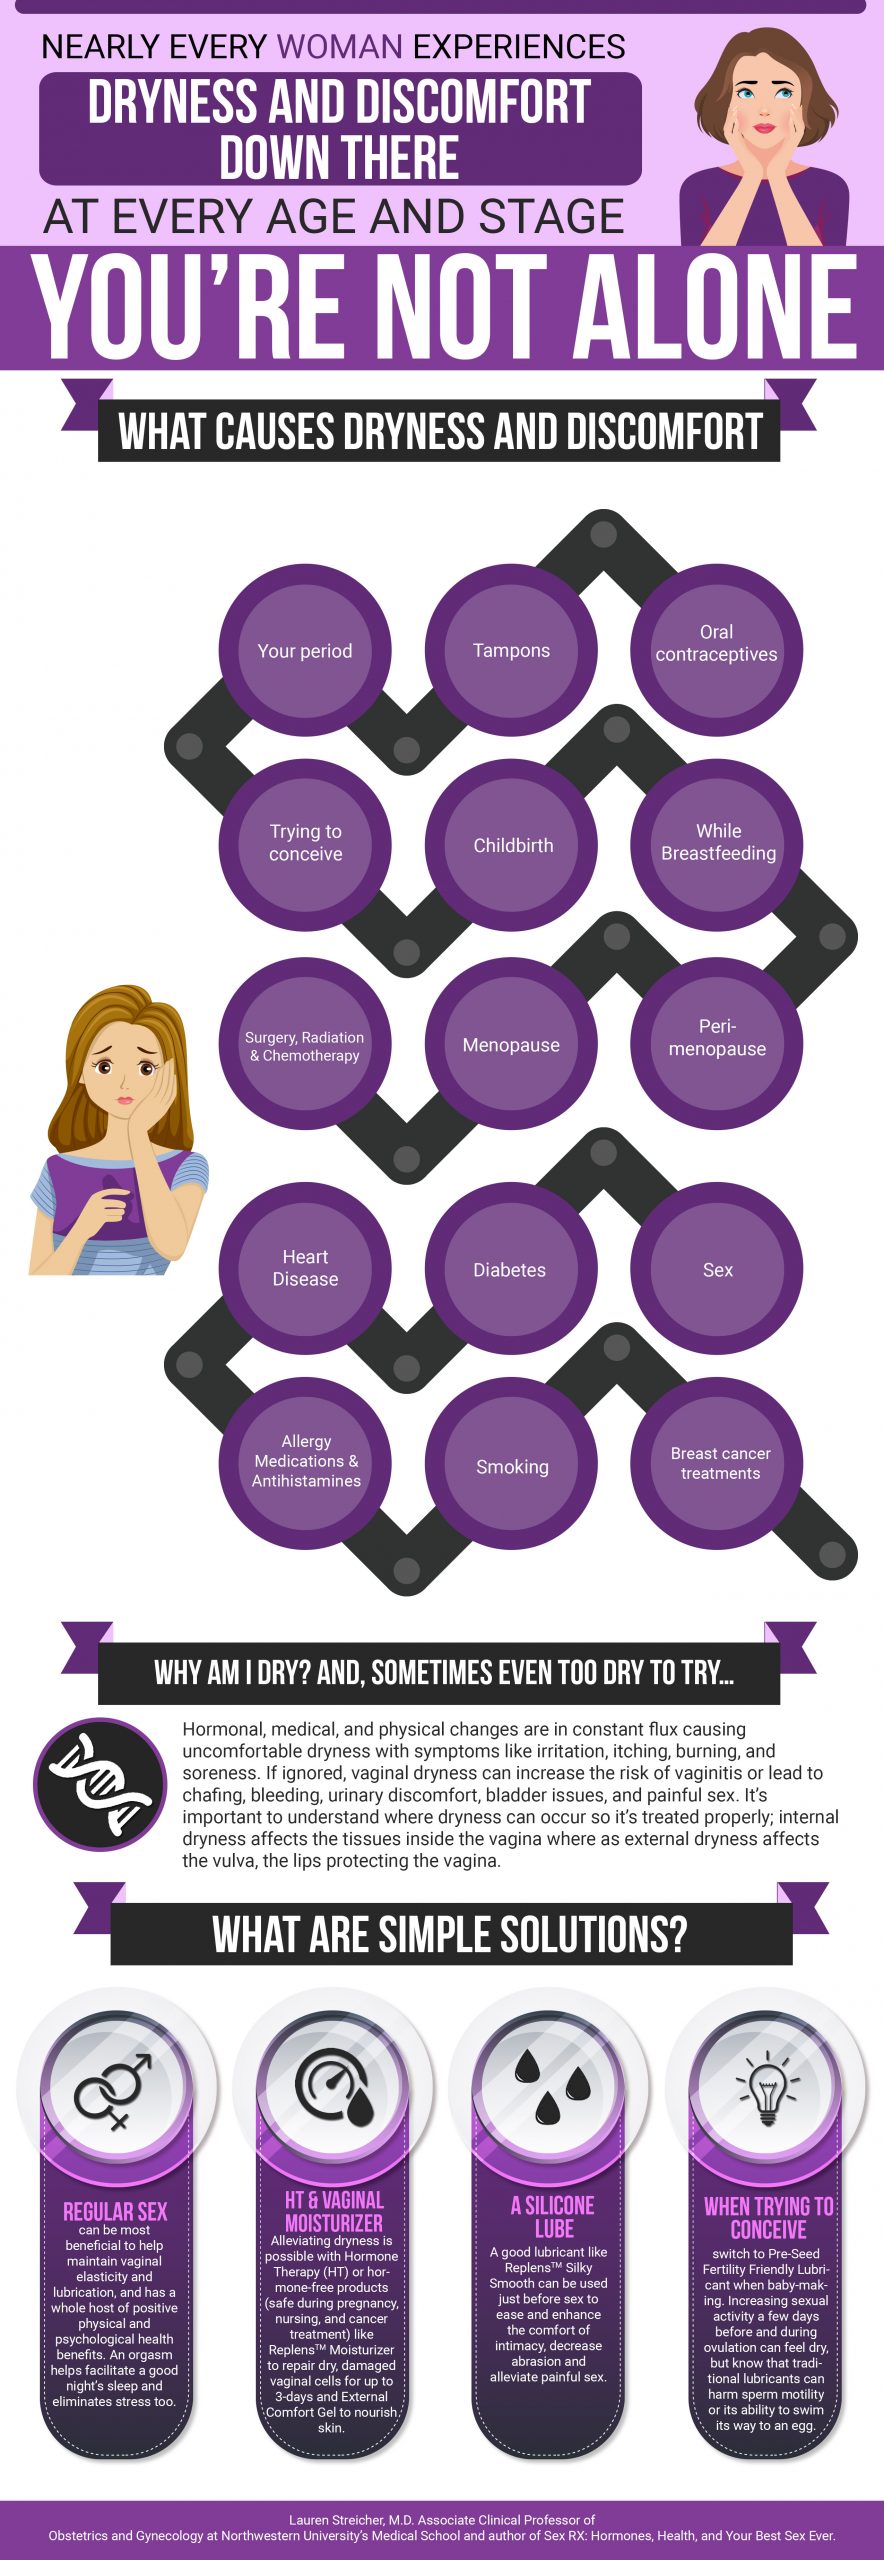 infographic on female dryness